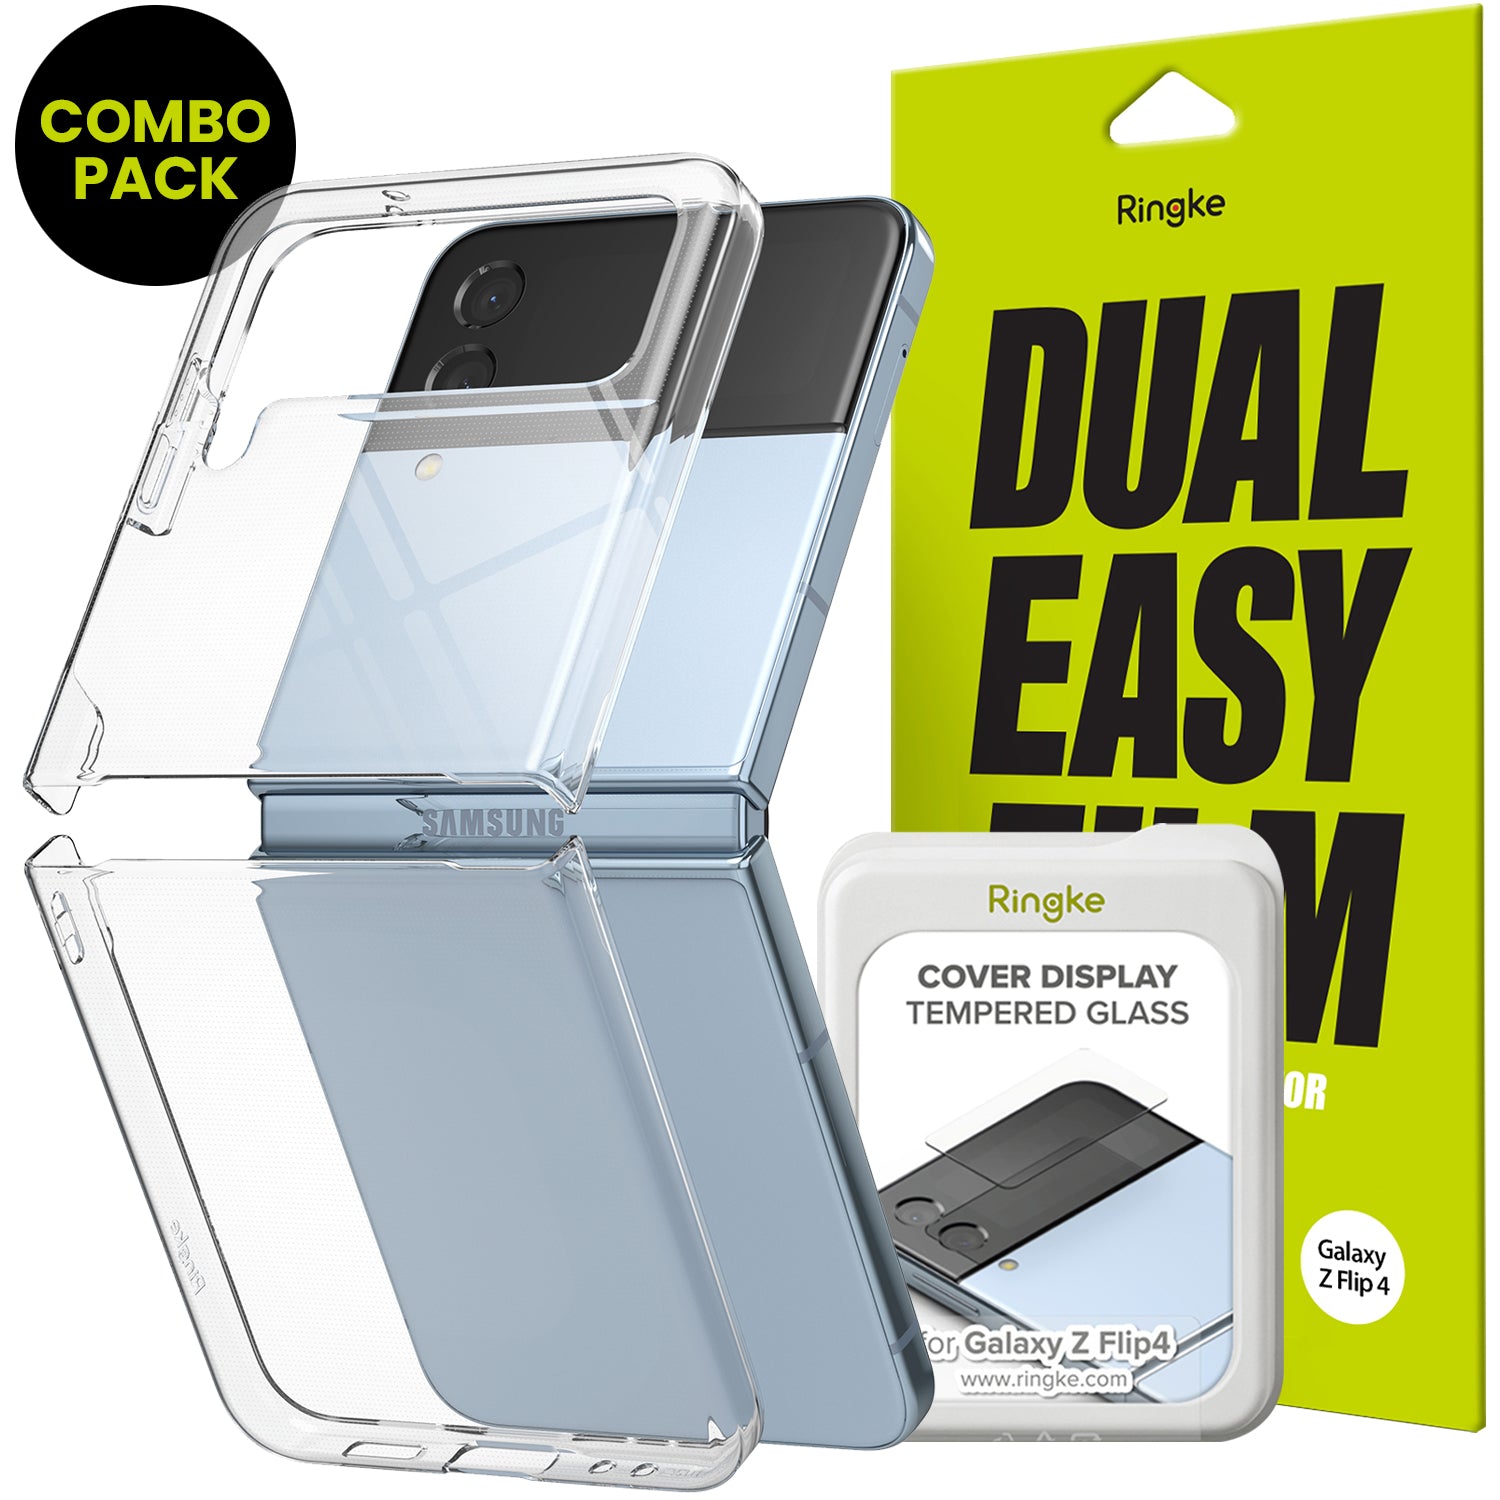 Galaxy Z Flip 4 Combo | Case + Screen Protector + Cover Display Glass